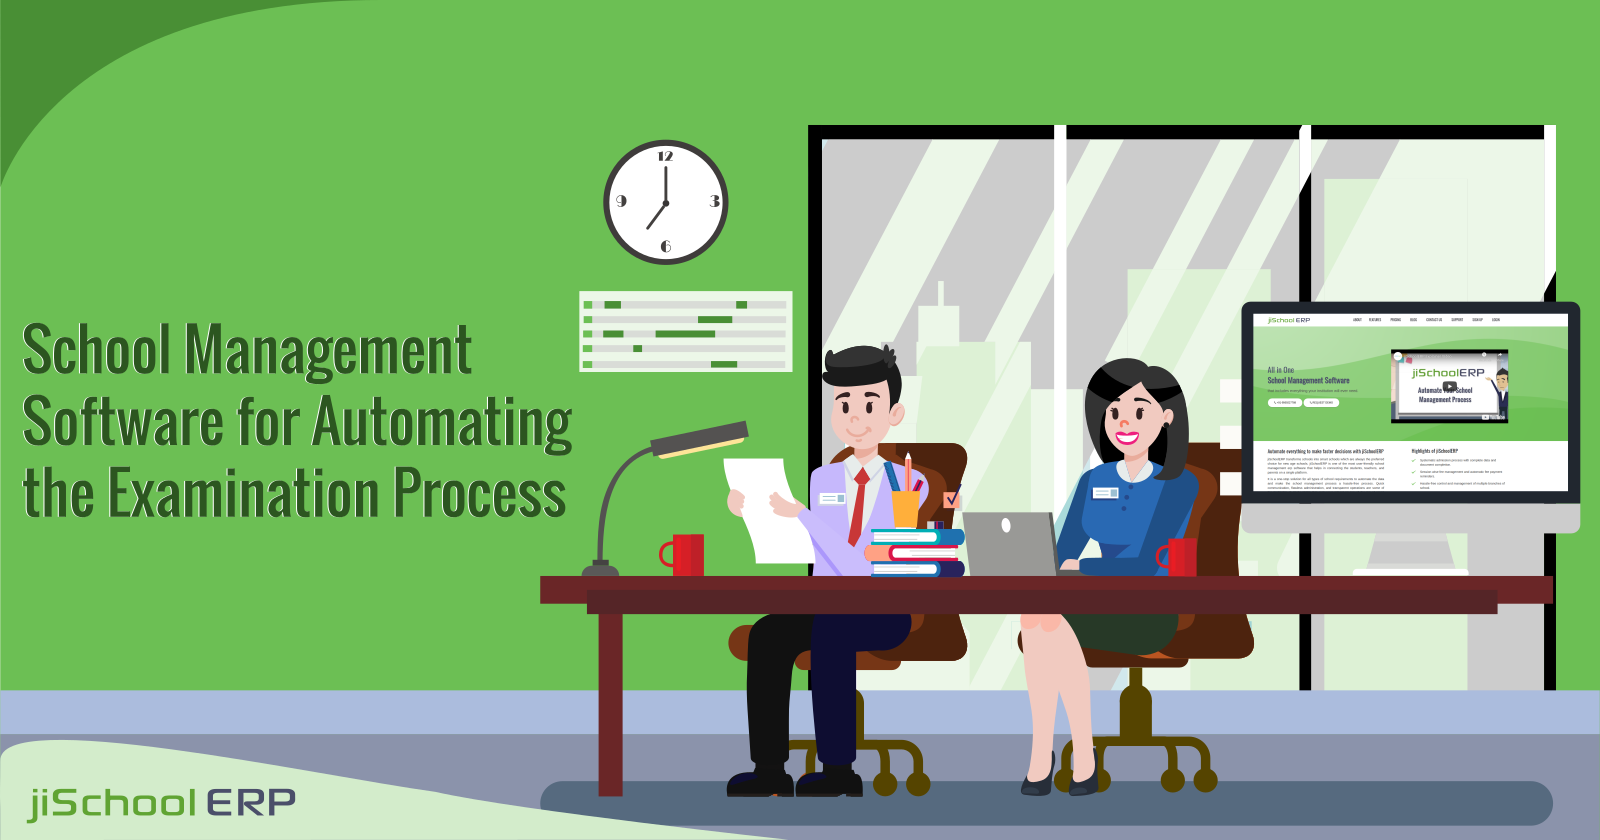 School Management Software for Automating the Examination Process